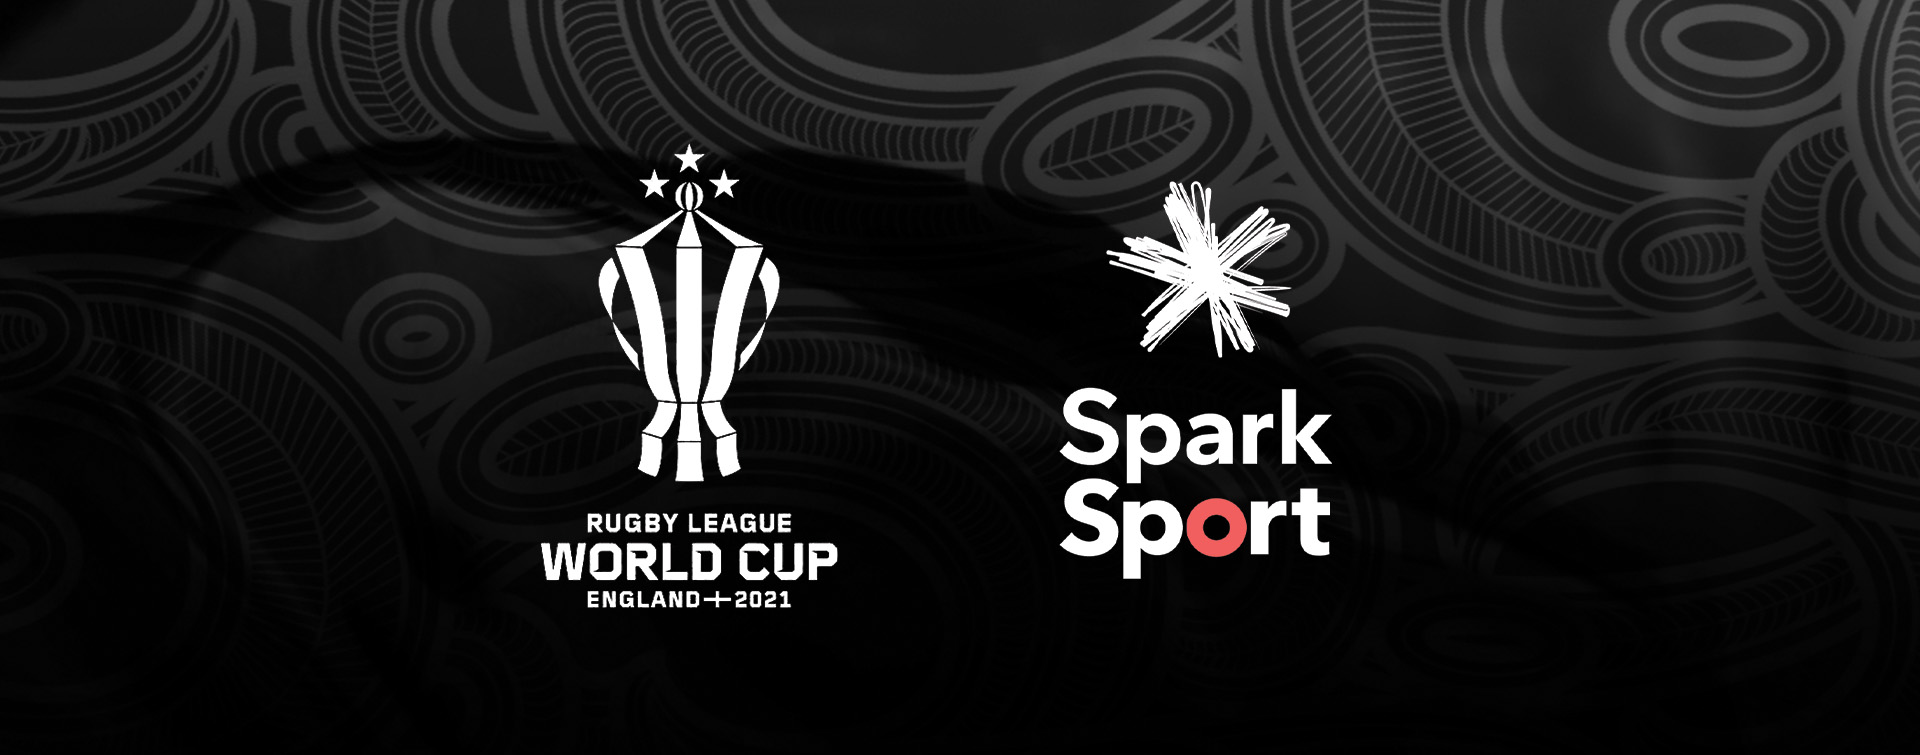 How to watch the Rugby League World Cup 2021